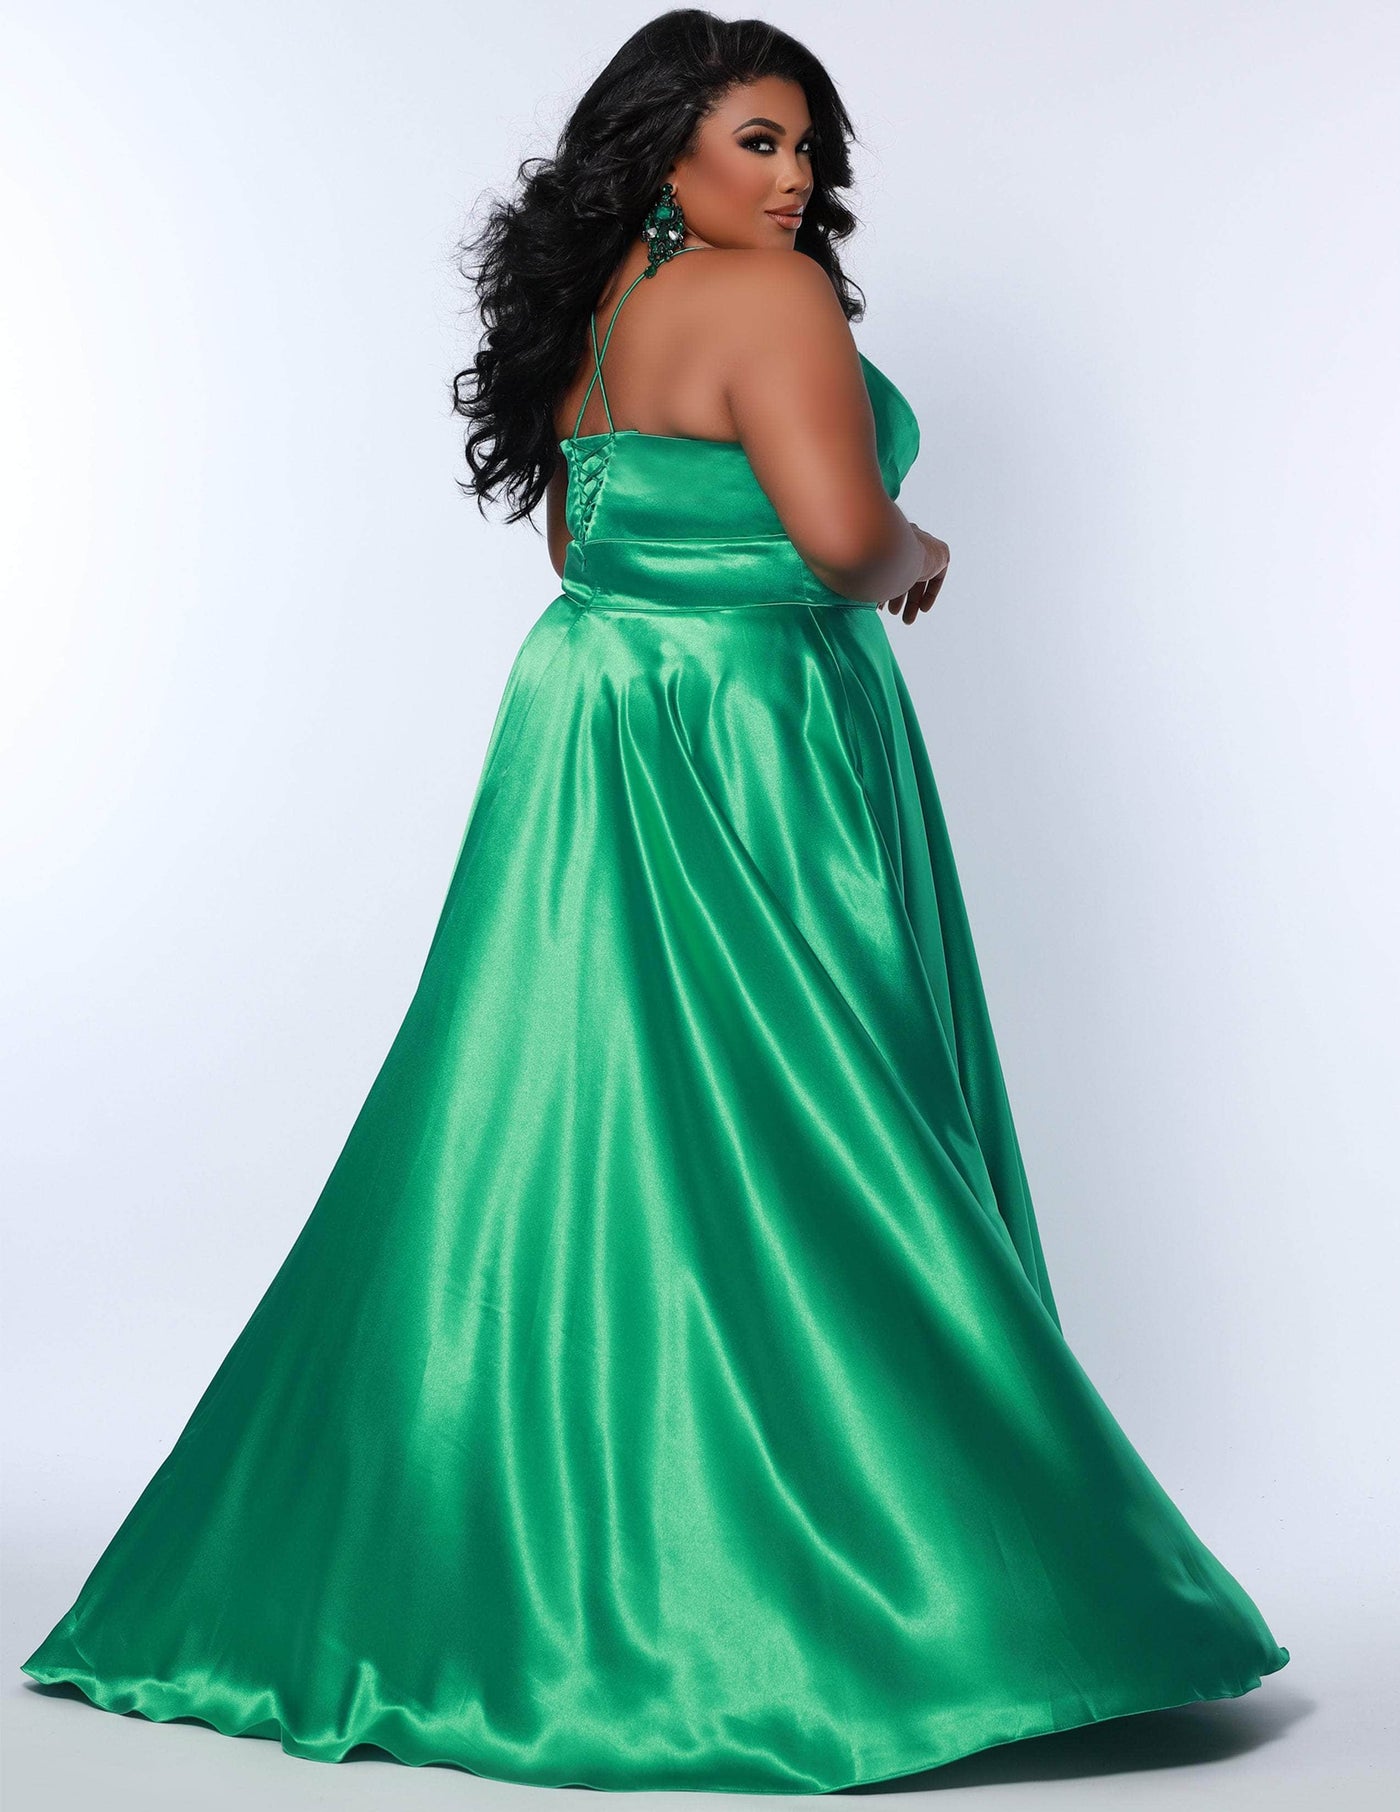 Sydney's Closet SC7355 - Sleeveless Satin Formal Gown Special Occasion Dress